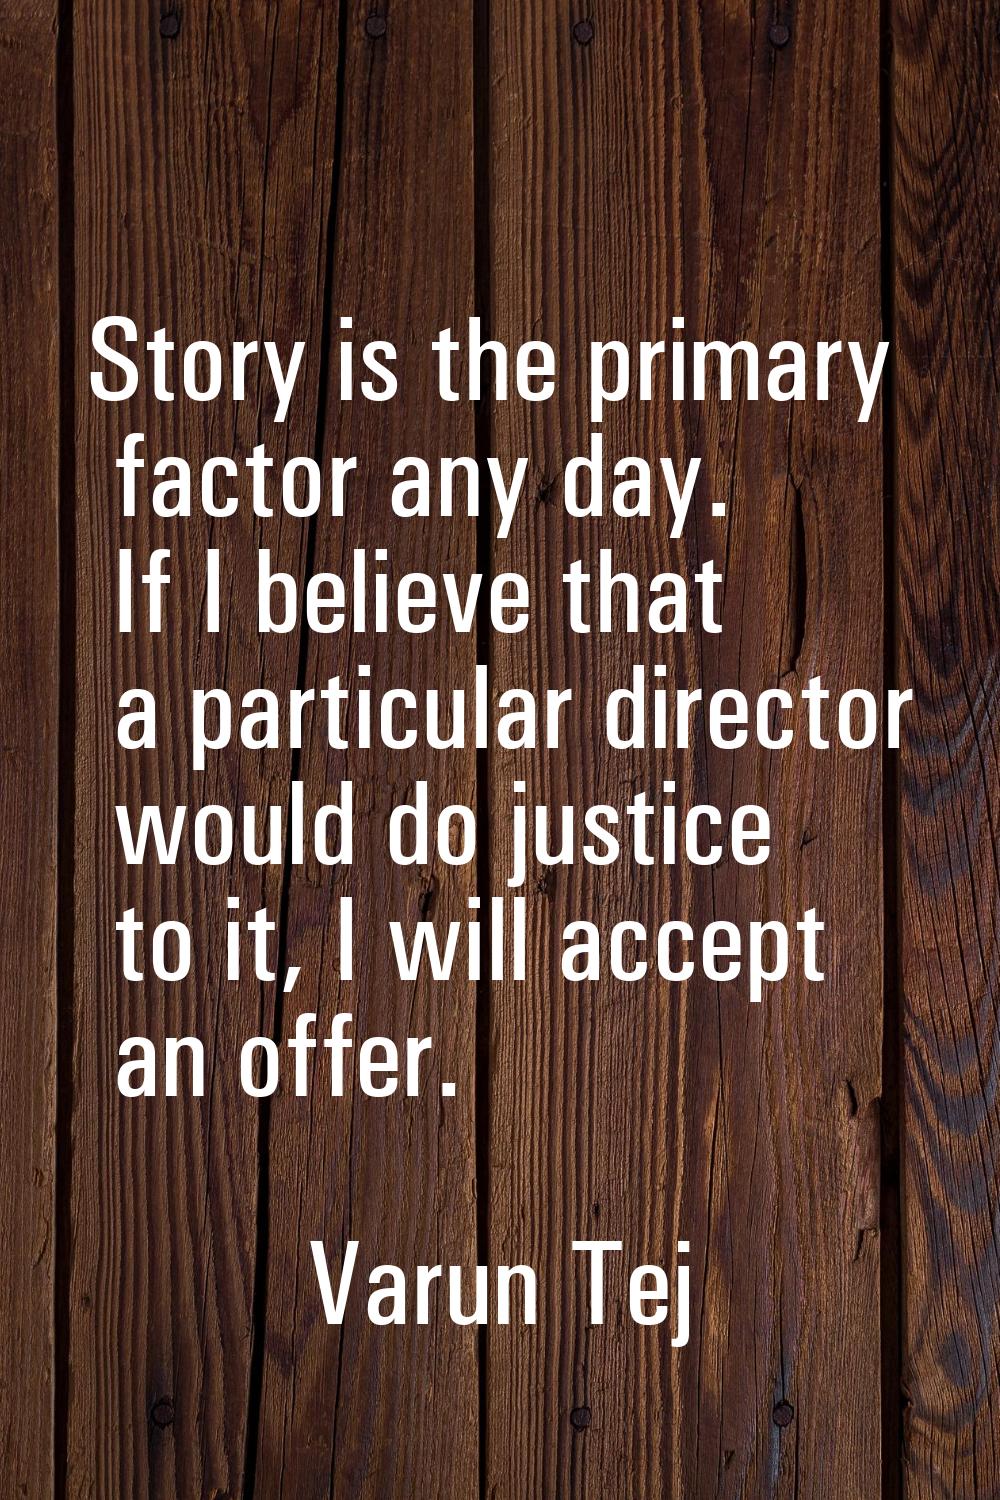 Story is the primary factor any day. If I believe that a particular director would do justice to it